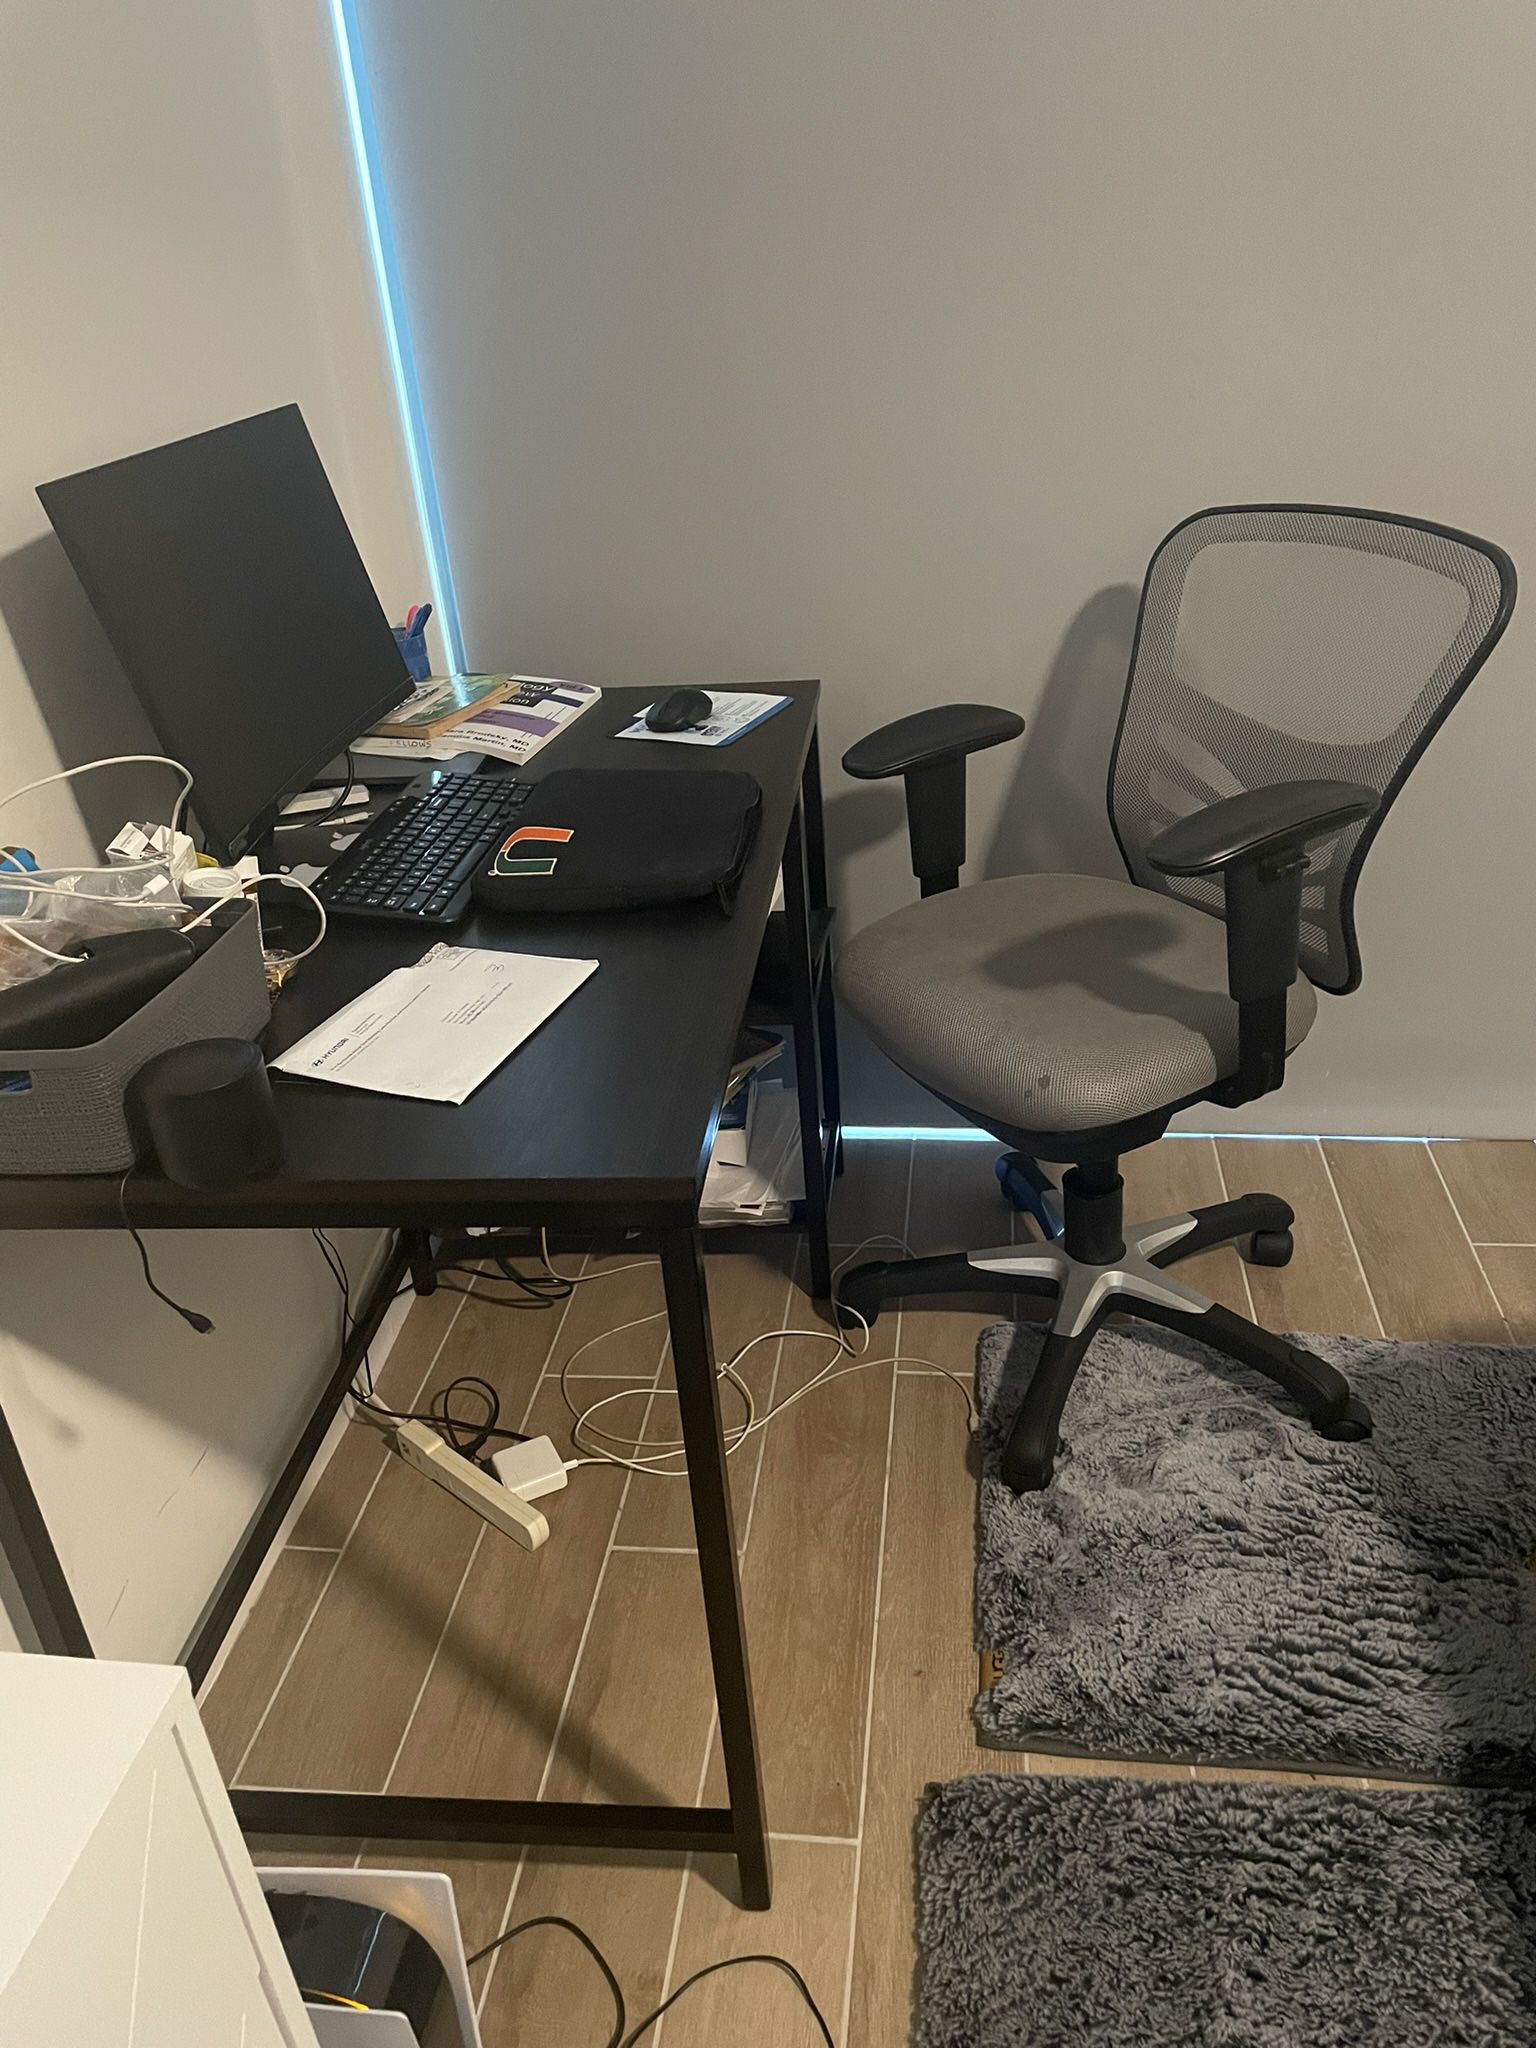 Home Office Table And Chair